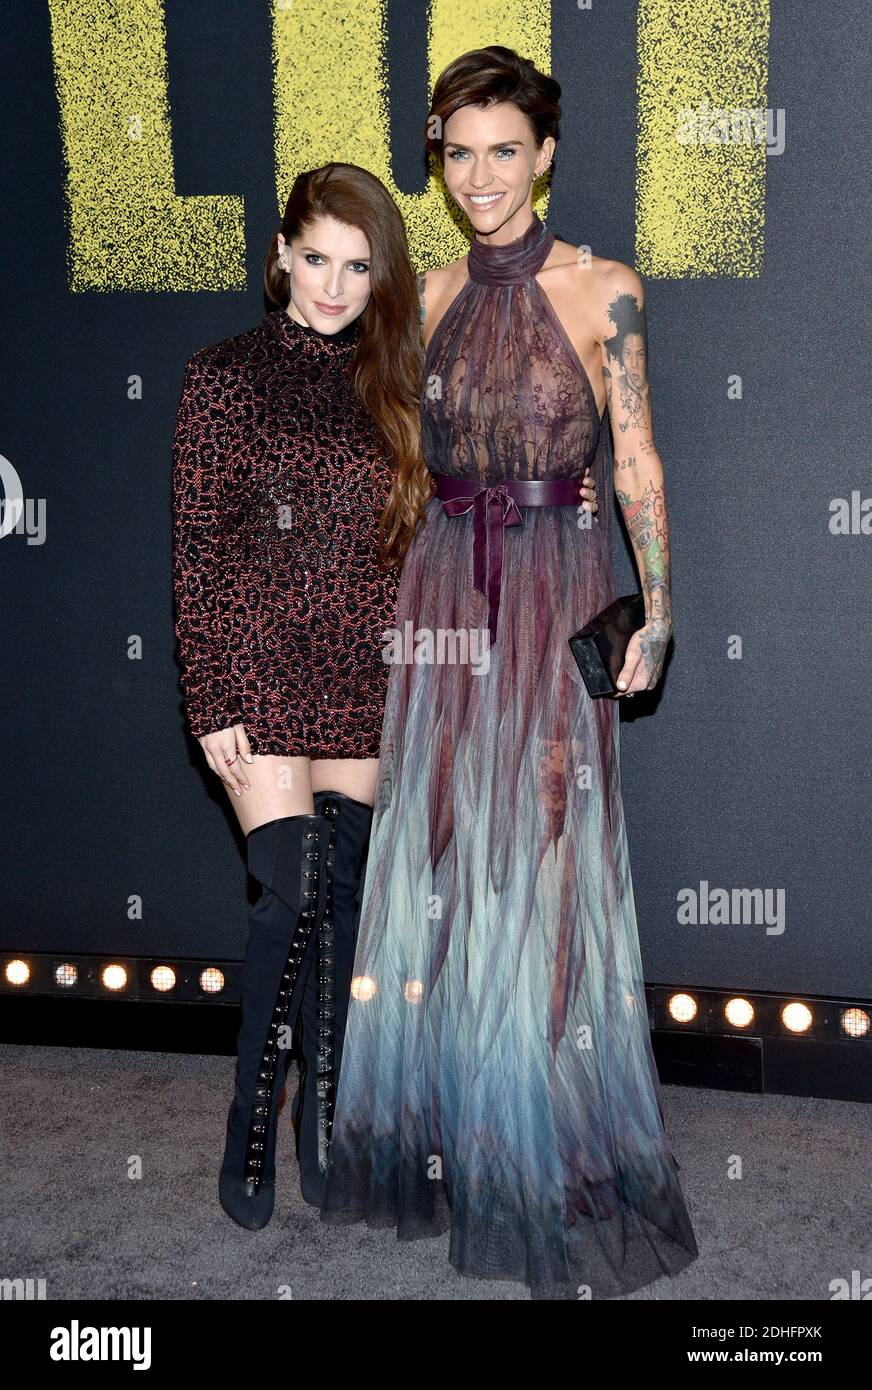 Anna Kendrick and Ruby Rose attend the premiere of Universal Pictures' 'Pitch  Perfect 3' at Dolby